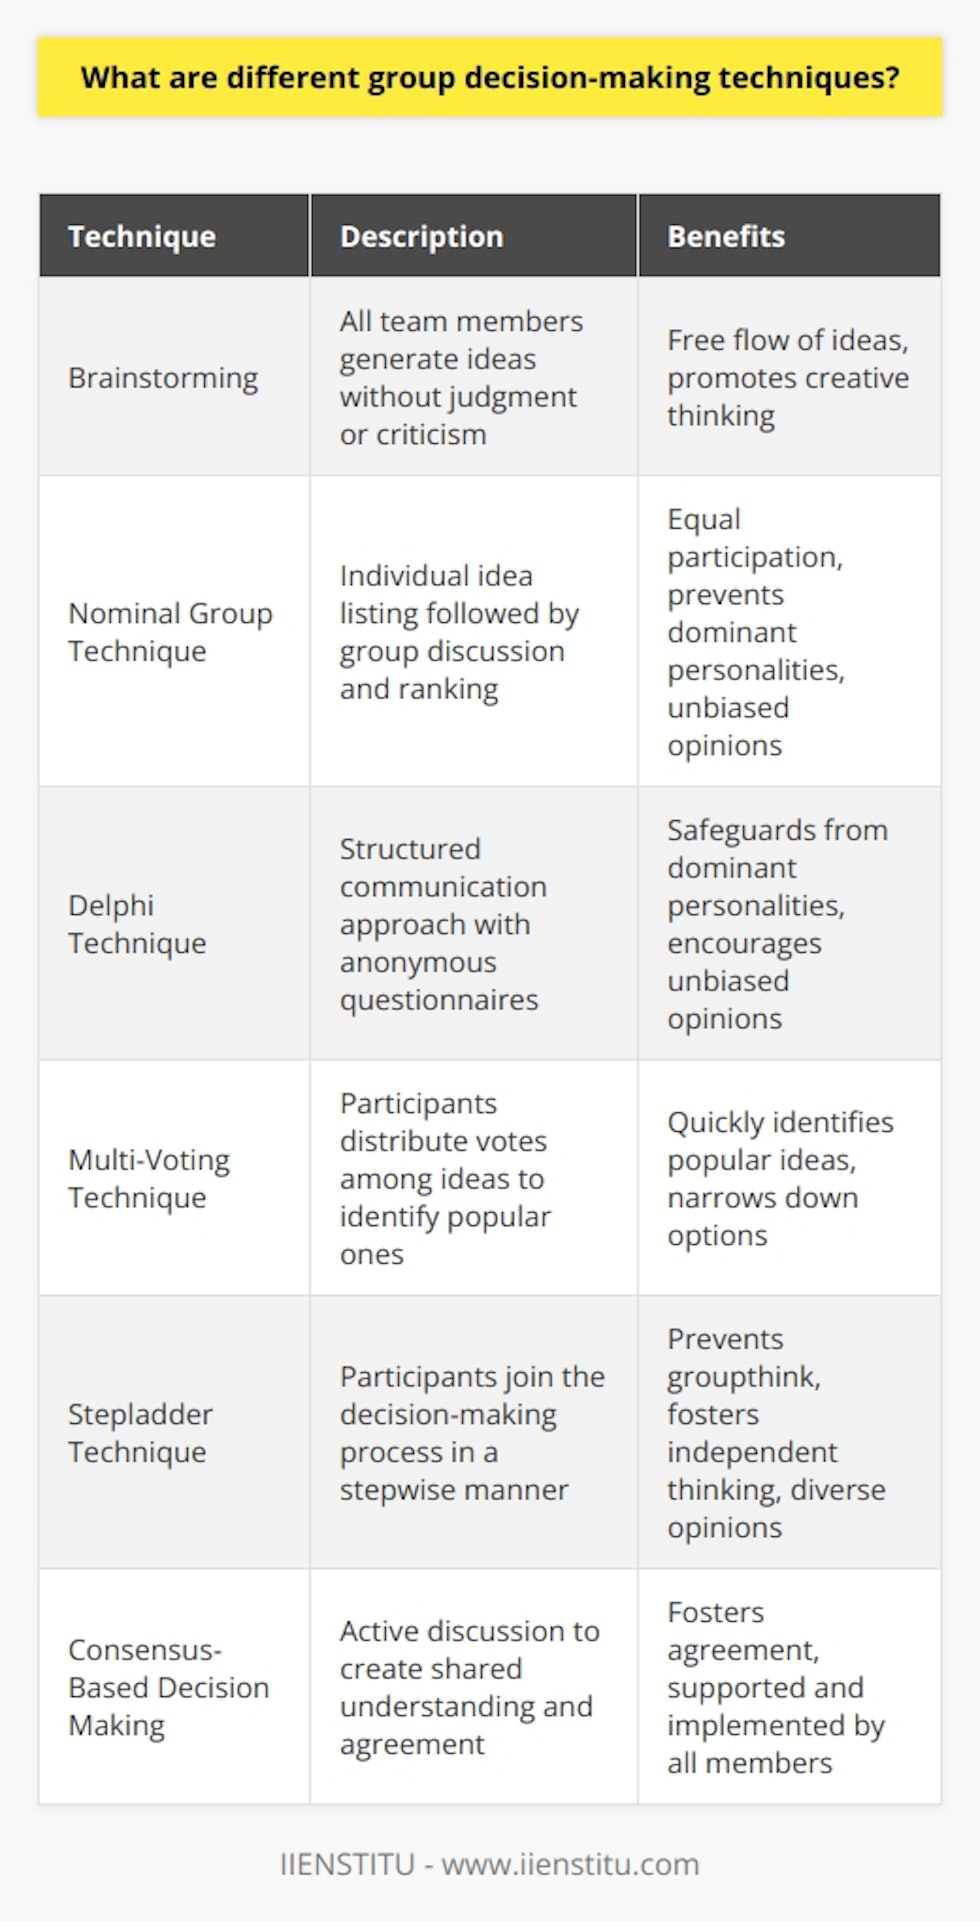 Group decision-making is an important aspect of teamwork and can lead to more effective and informed decisions. There are various techniques that can be used to facilitate group decision-making, each with its own benefits and drawbacks. In this article, we will explore some of these techniques in detail.One commonly used technique is brainstorming. In brainstorming sessions, all team members are encouraged to generate numerous ideas without judgment or criticism. This allows for a free flow of ideas and promotes creative thinking. A facilitator is often present to guide the conversation and ensure that everyone actively participates. The goal of brainstorming is to create an open and safe atmosphere where all ideas are considered.Another technique is the nominal group technique, which ensures equal participation within groups. In this method, participants individually list their ideas before discussing and clarifying them as a group. Subsequently, the ideas are ranked through a secret ballot, allowing the group to identify and prioritize the best ideas. This technique helps to prevent dominant personalities from influencing the decision-making process and encourages unbiased opinions.The Delphi technique is a structured communication approach that is useful when face-to-face meetings are not possible. Participants anonymously answer a series of questionnaires, and their responses are summarized and redistributed for further input. This process repeats until a consensus emerges. The Delphi technique safeguards participants from the influence of dominant personalities and encourages unbiased opinions.For identifying the most popular ideas from a large list, the multi-voting technique can be used. Also known as the dotmocracy method or sticker voting, each participant is given equal votes that they can distribute freely among the ideas. The ideas with the most votes are then prioritized and discussed further. This technique is effective for quickly identifying popular ideas and narrowing down options.To prevent groupthink and promote individual contribution, the stepladder technique can be employed. This technique introduces participants to the decision-making process in a stepwise manner. Initially, only two participants discuss the issue at hand before a third joins in, contributing their ideas without influence from the pre-existing conversation. This continues until all members have joined, fostering independent thinking and diverse opinions.Finally, consensus-based decision making aims to foster agreement among team members rather than relying on majority votes. In this method, individual opinions, concerns, and suggestions are actively discussed, with the goal of creating a shared understanding of the problem and generating collective solutions. This approach can be time-consuming but produces decisions that are more likely to be supported and implemented by all members.In conclusion, there are various group decision-making techniques available to facilitate collaboration, creativity, and diverse perspectives. By selecting an appropriate method based on the context and group dynamics, teams can make more effective and informed decisions.